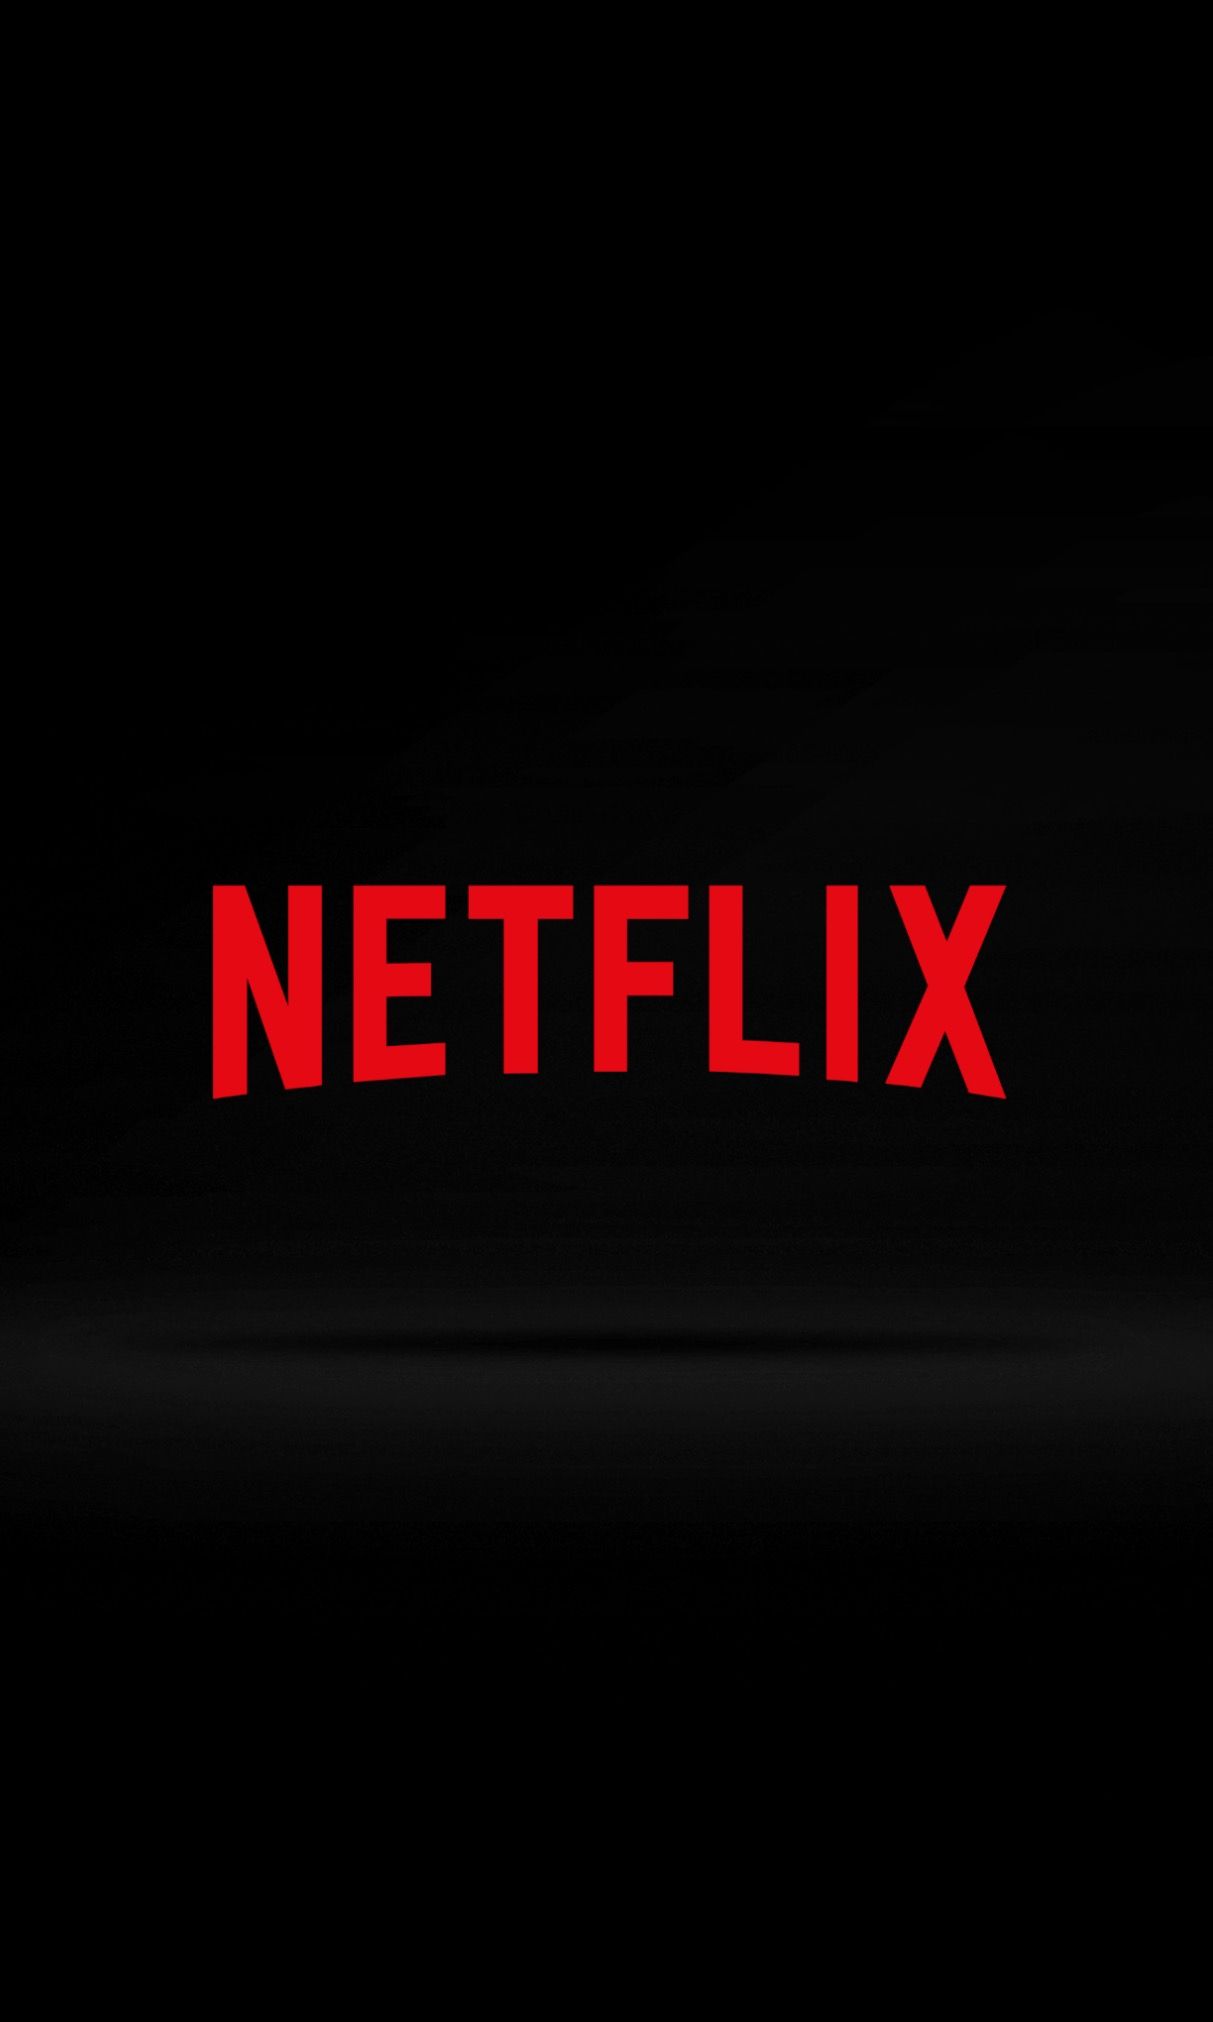 Netflix Wallpaper Iphone wallpapers in 2019 Shows coming to